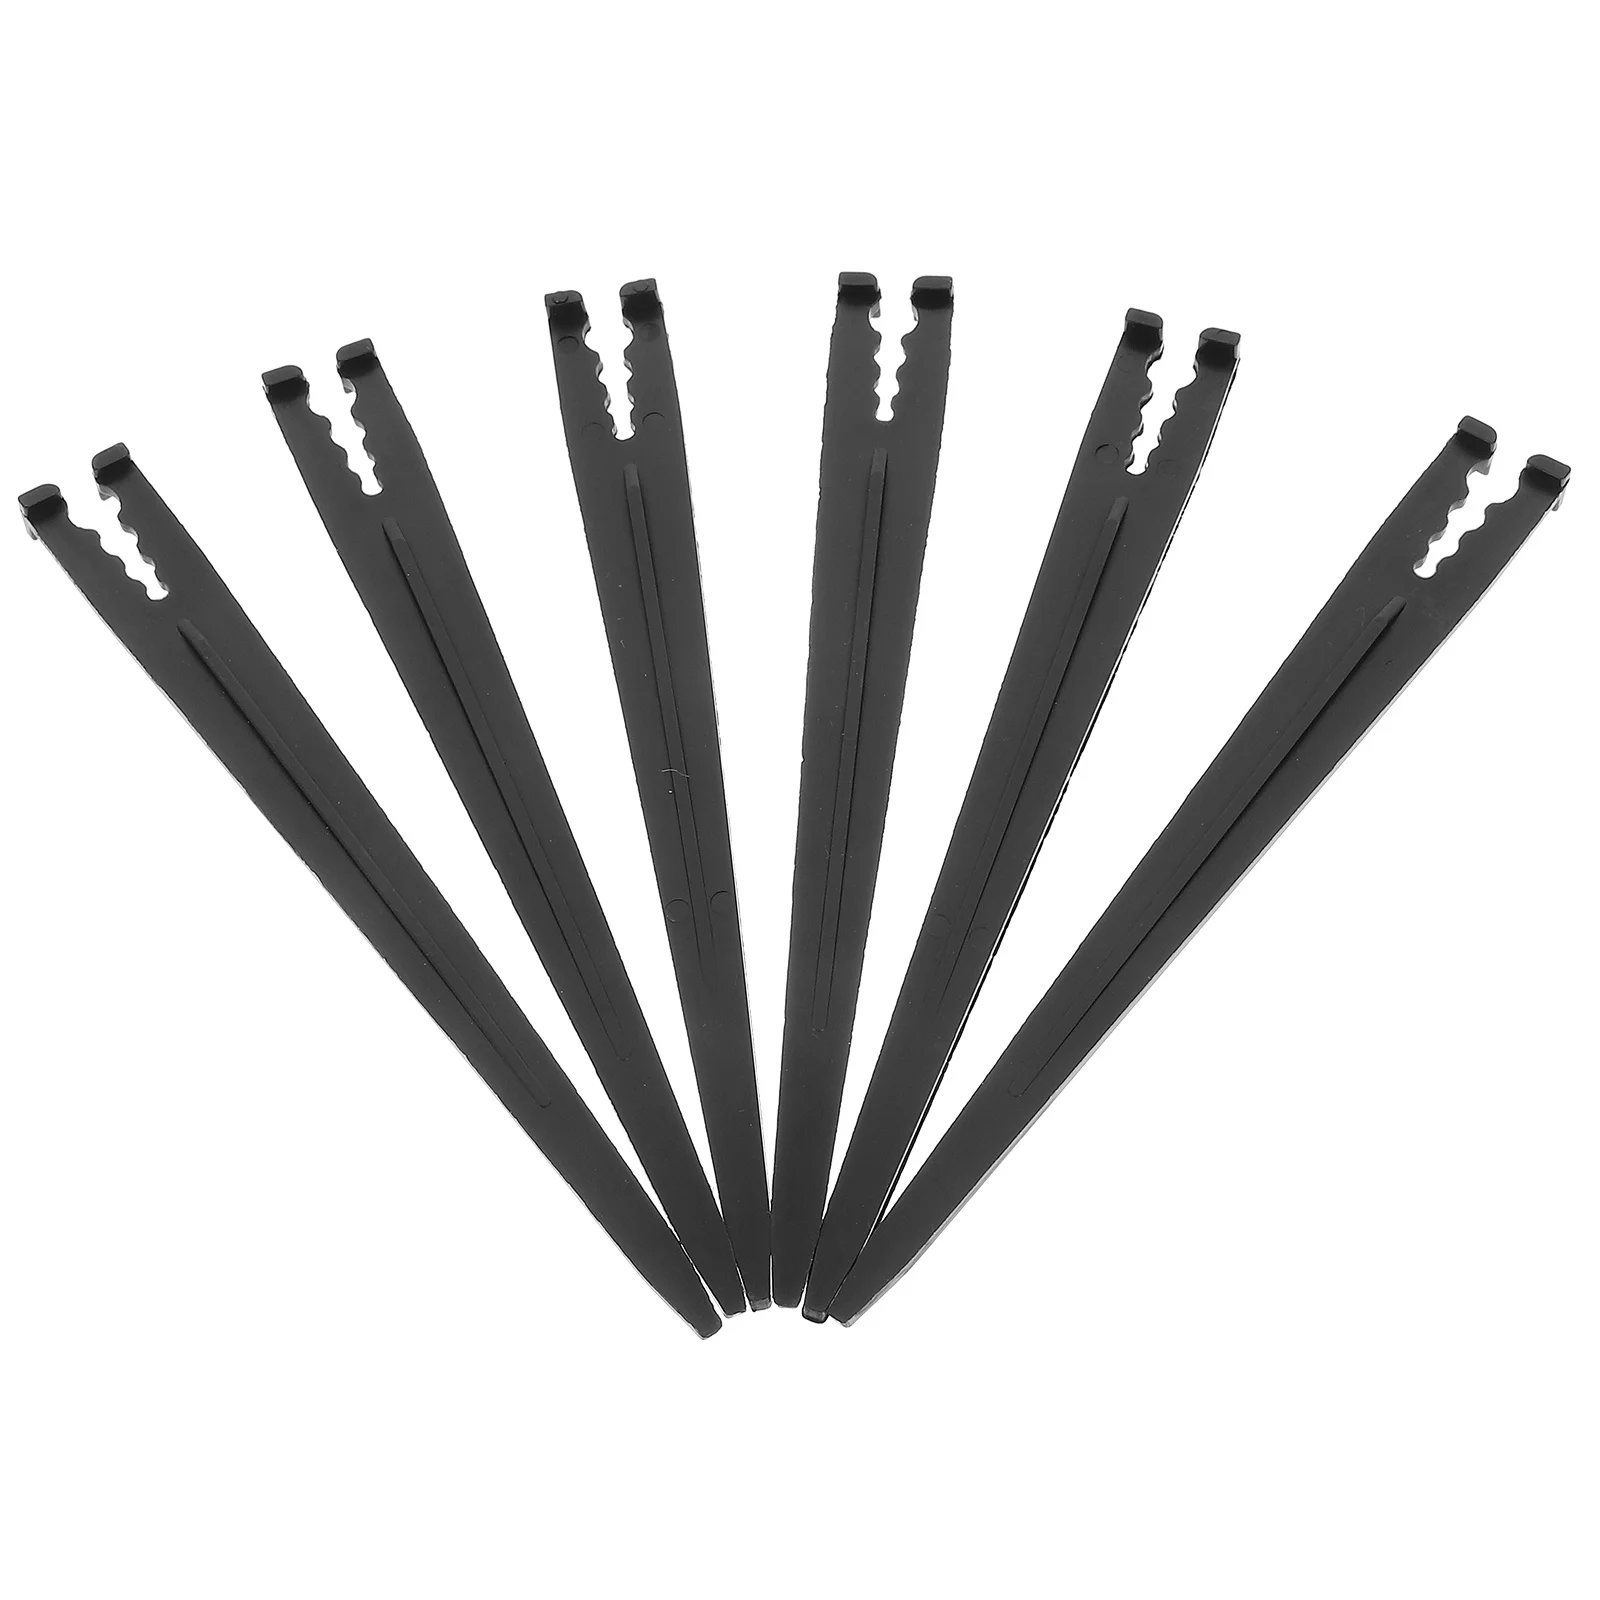 

100 Pcs Irrigation Support Stakes Garden Ground Nail Tool Plastic Pipe Drip Tubing Gardening Tools Pile Accessory